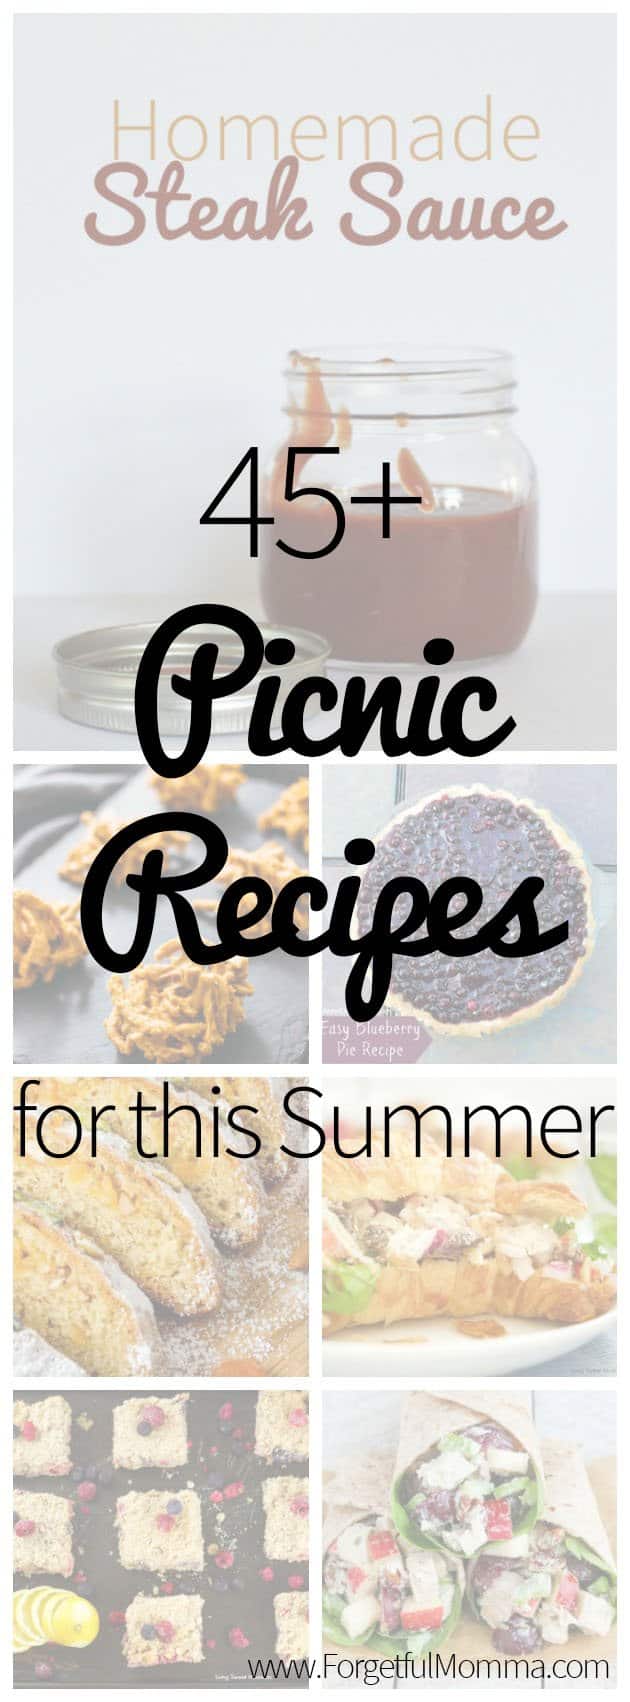 45+ Picnic Recipes for this Summer